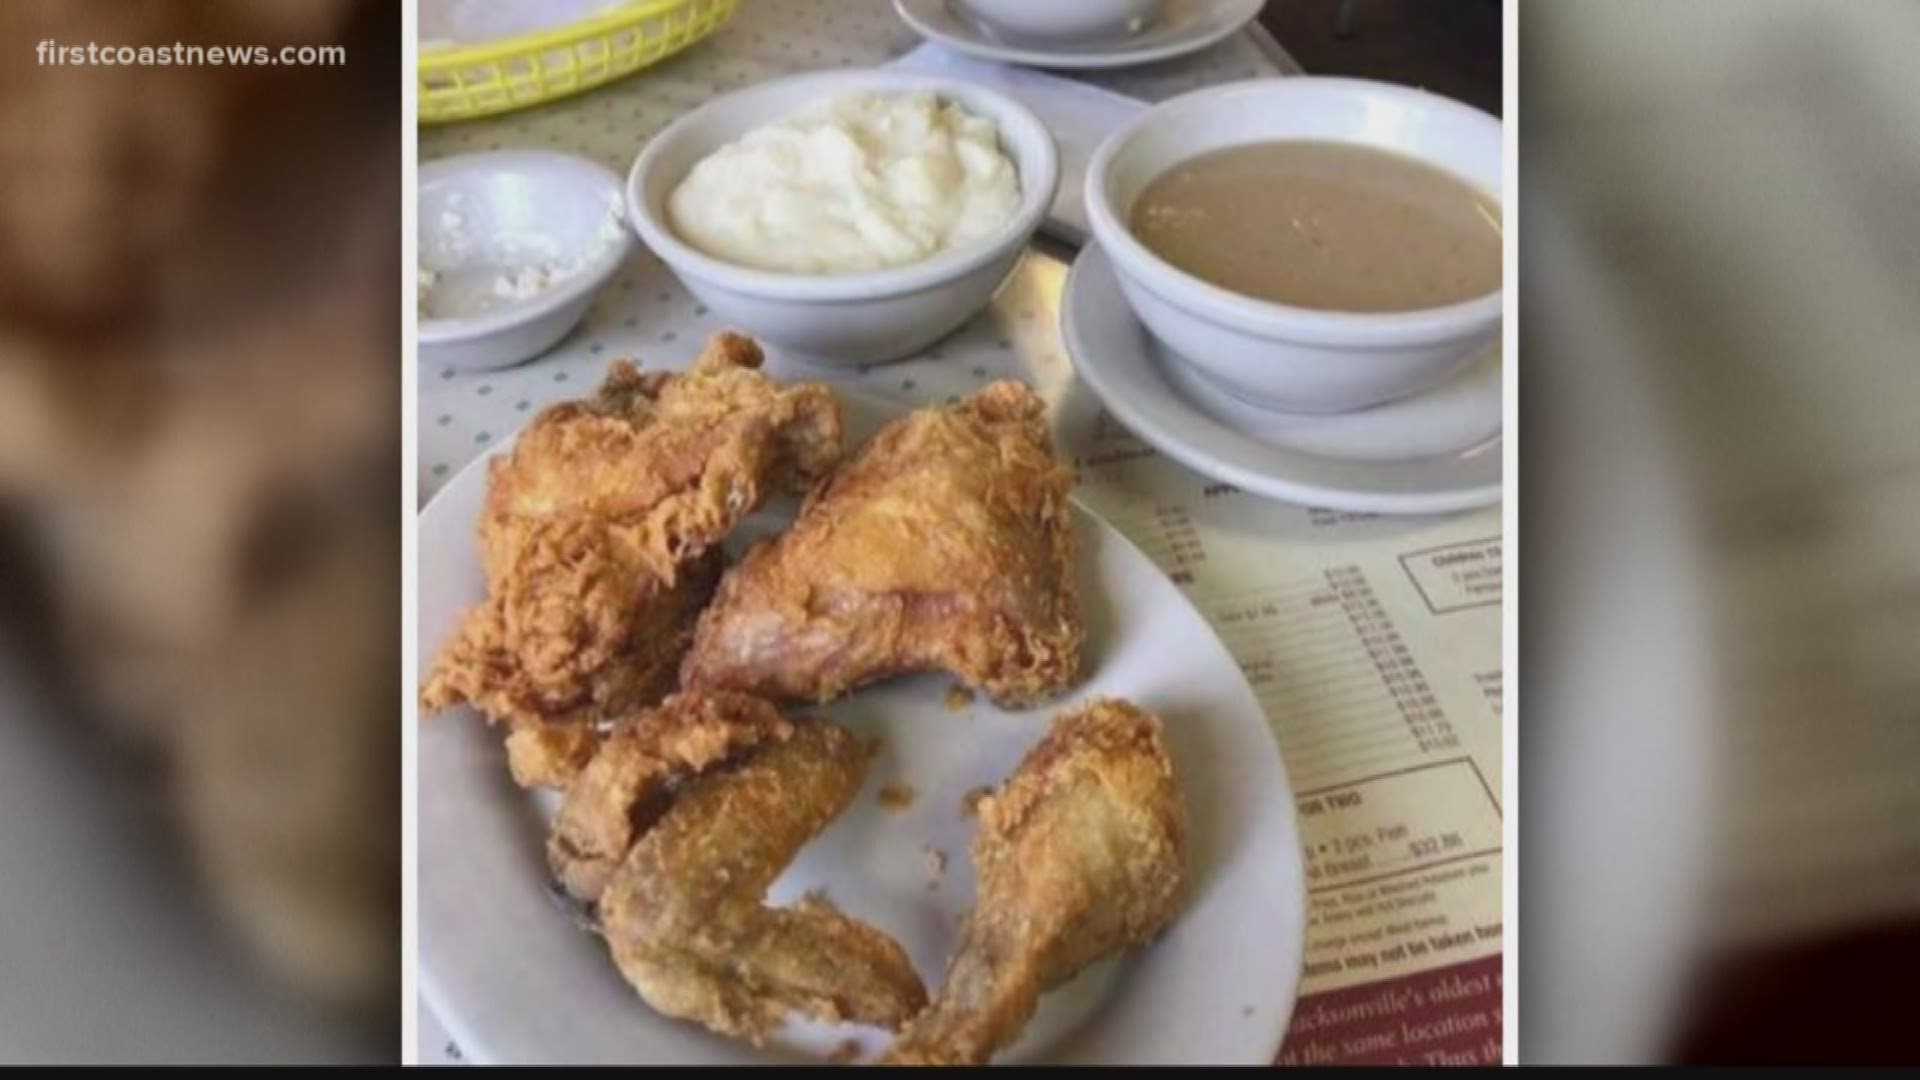 Beach Road Chicken Dinners is a Jacksonville landmark, serving up family-style dinners for 80 years. Until they find that right buyer, the owners said, the city’s longest-operating restaurant will keep on operating.